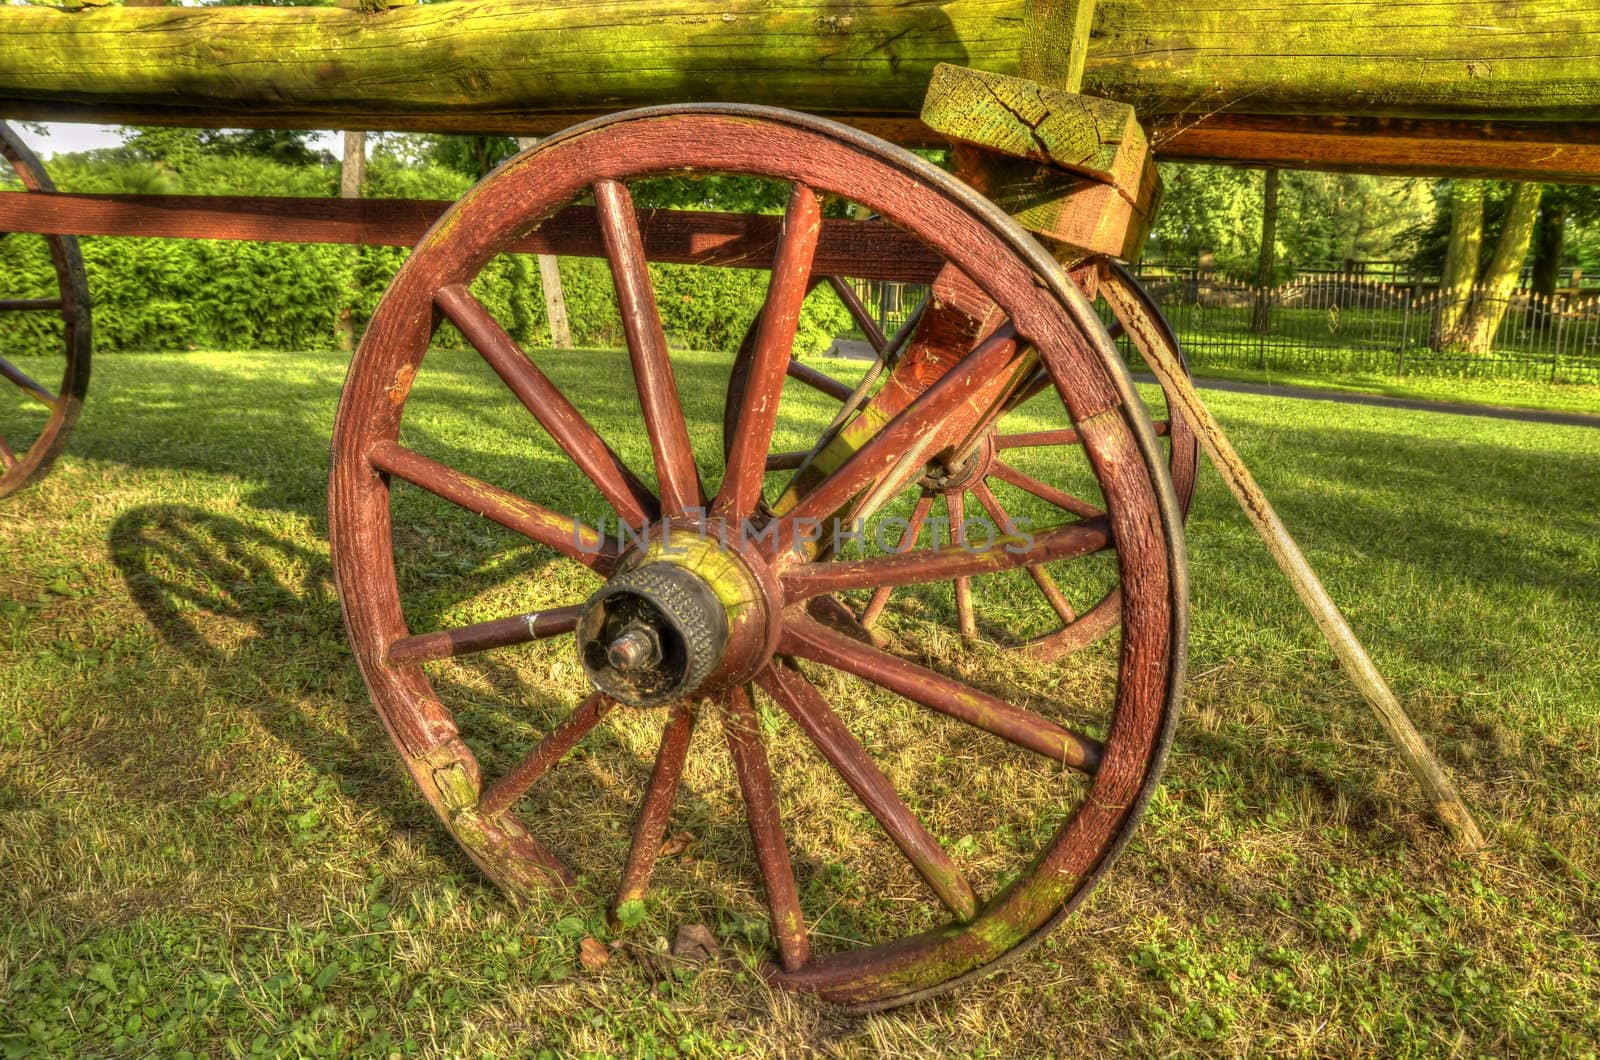 This photo present old wooden wagon in the park decoration HDR.